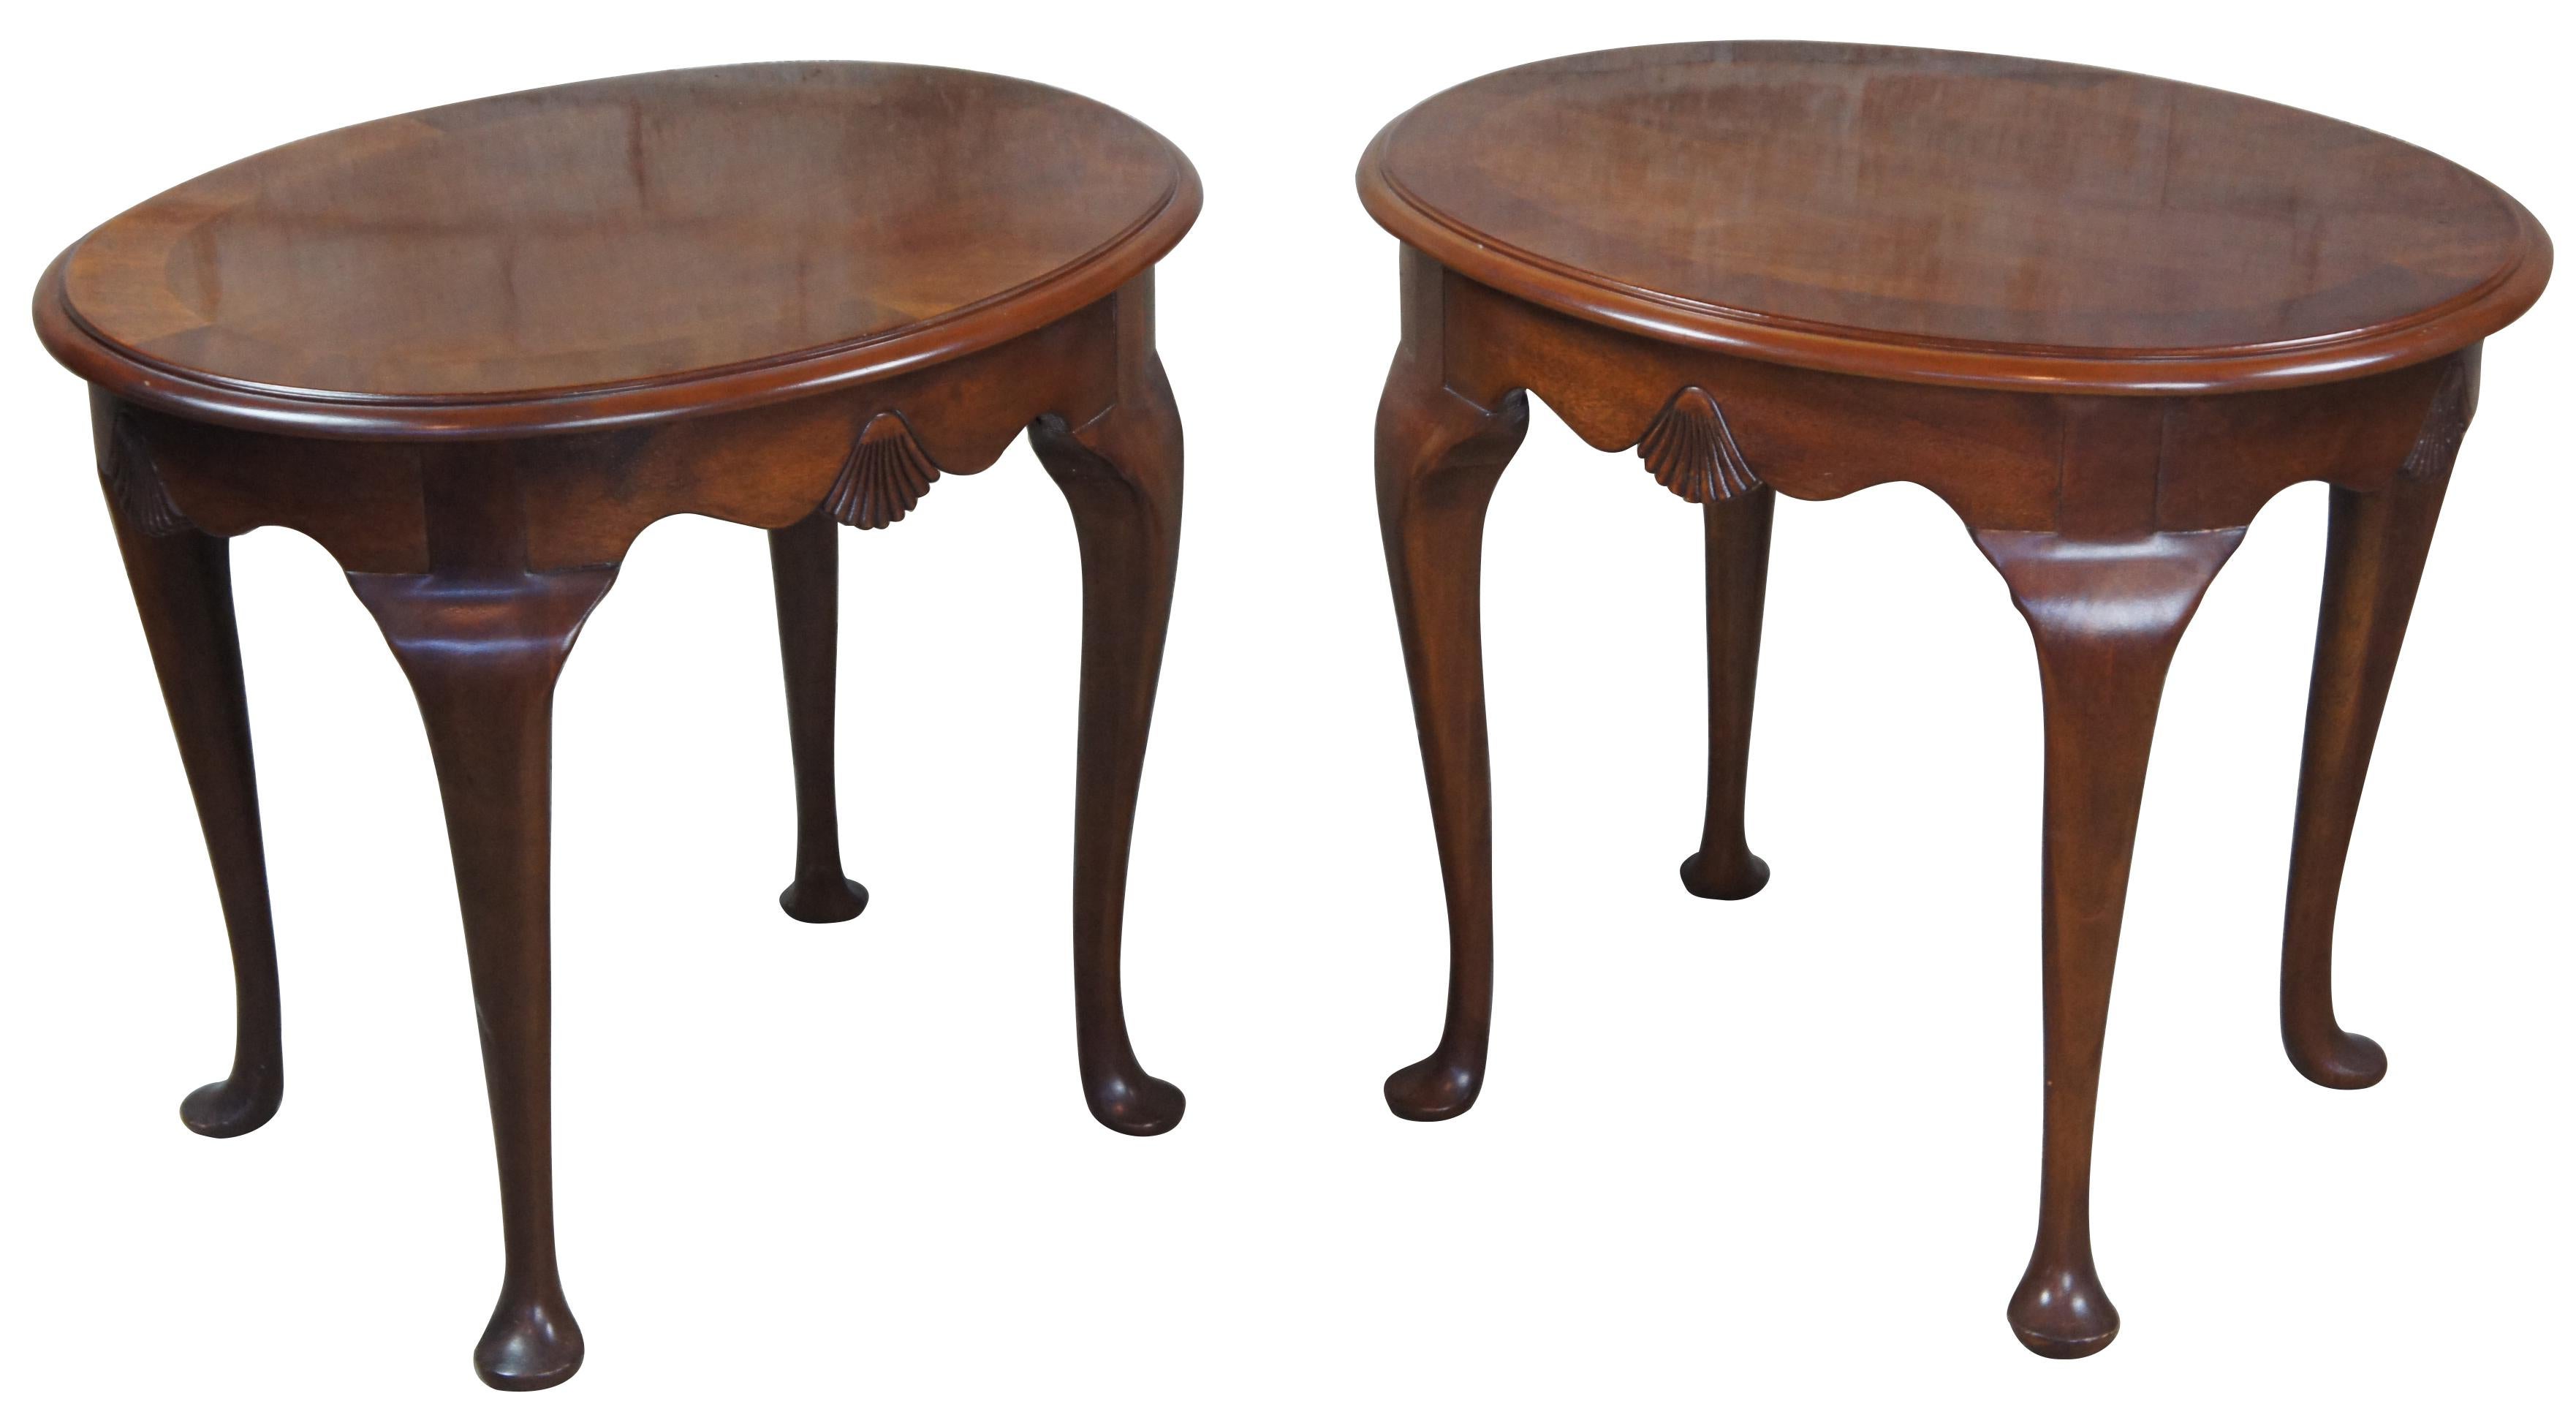 Pair of Drexel 18th century collection oval side, end or accent tables, #138-306-3, circa 1988. Features a banded top, scalloped apron and cabriole legs leading to pad feet.
 